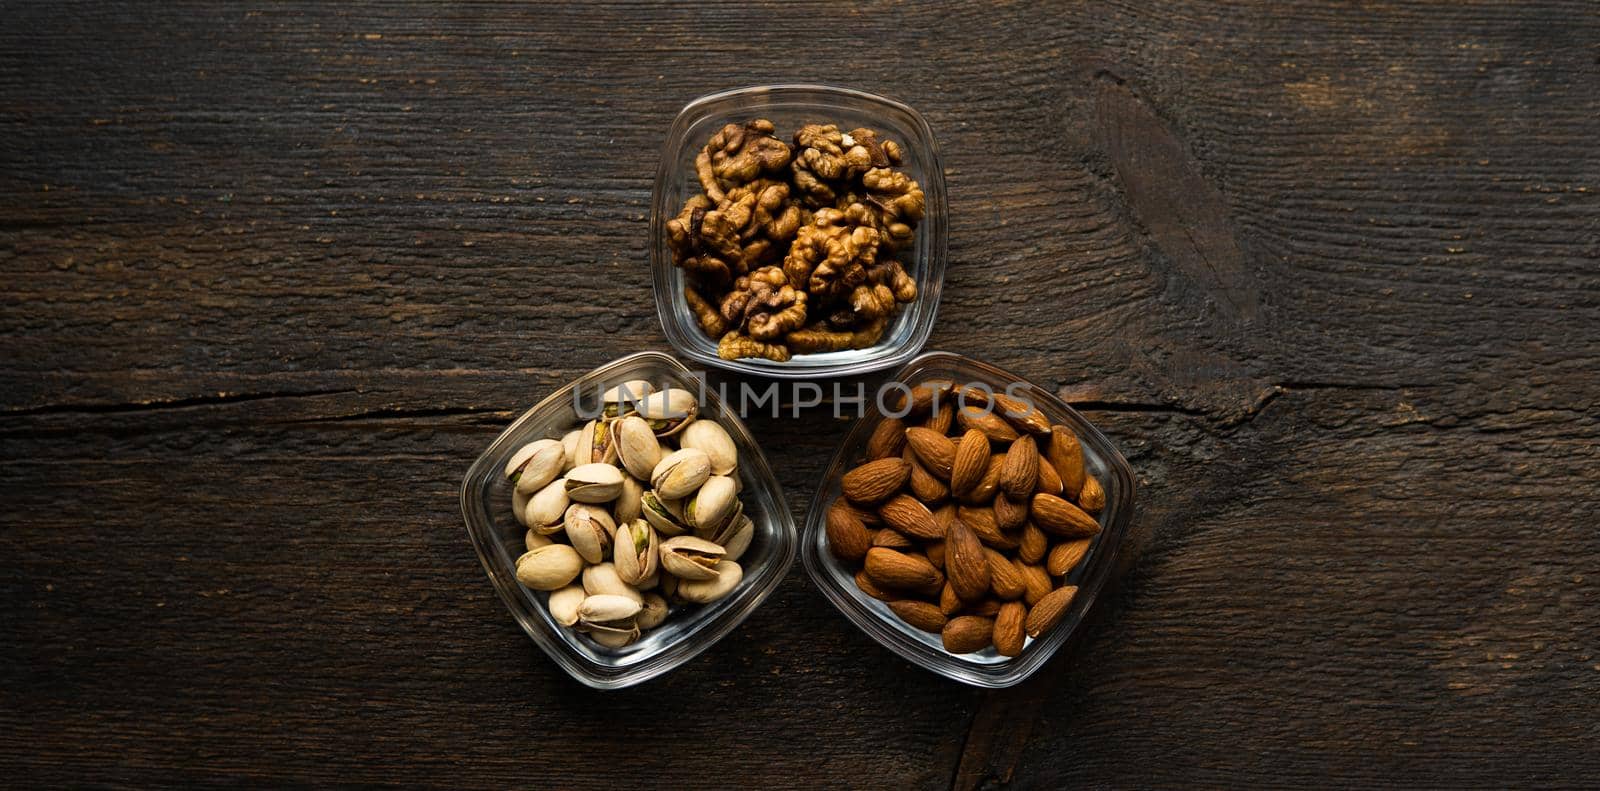 Almond, pistachio and walnut in a small plates which standing on a vintage wooden table. Nuts is a healthy vegetarian protein and nutritious food. by vovsht